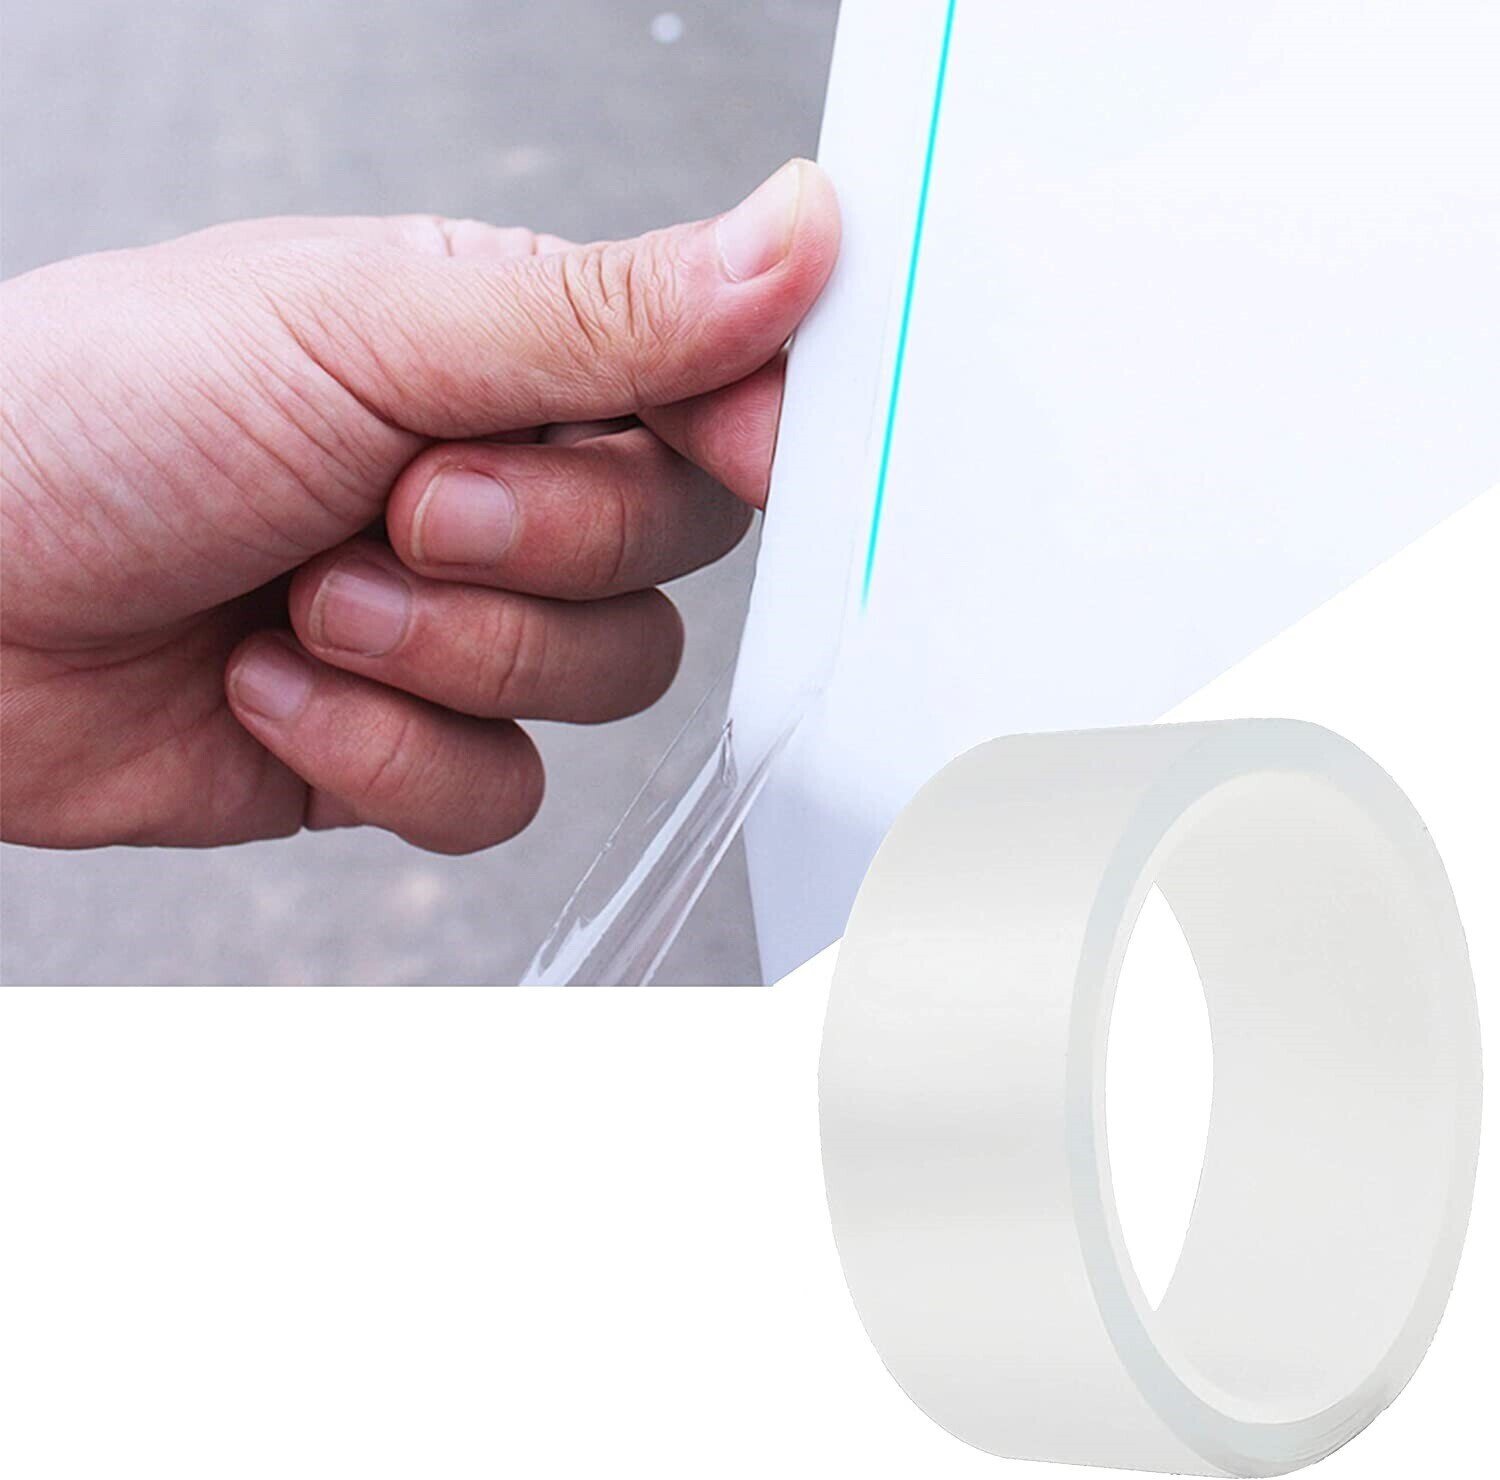 SUVs Car Door Entry Guard Clear Trim Guard/Cover for Car Door Sill Edge Anti-Collision Protector Film Universal for Most Cars Rear Bumper Vehicles 2 x 197, Transparent 